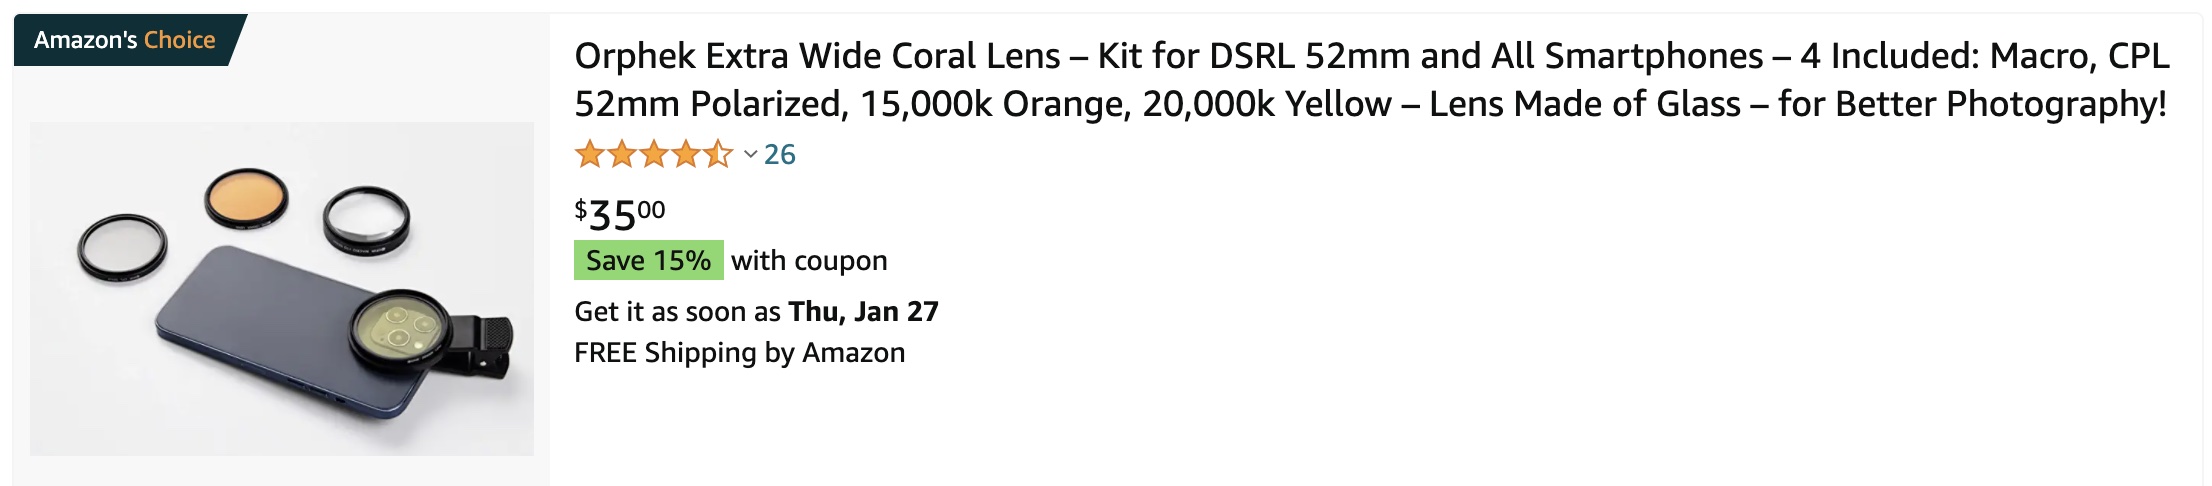 CPL 52mm Polarized 15,000k Orange 20,000k Yellow – Lens Made of Glass – for Better Photography! Orphek Extra Wide Coral Lens – Kit for DSRL 52mm and All Smartphones – 4 Included: Macro 